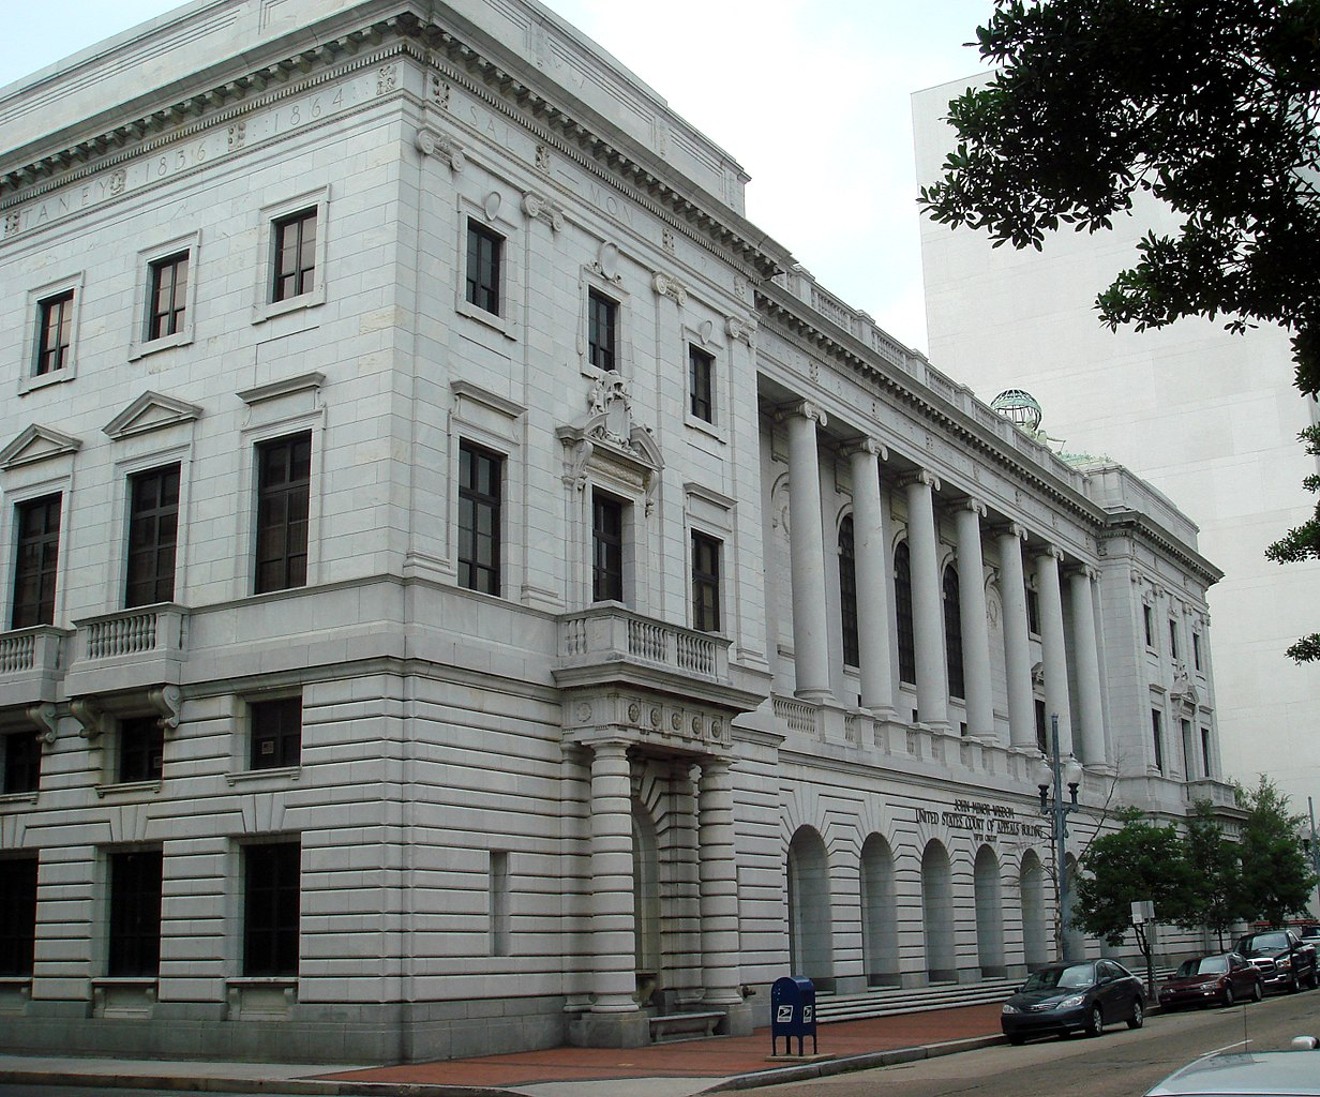 The John Minor Wisdom U.S. Courthouse is home to the 5th U.S. Circuit Court of Appeals.